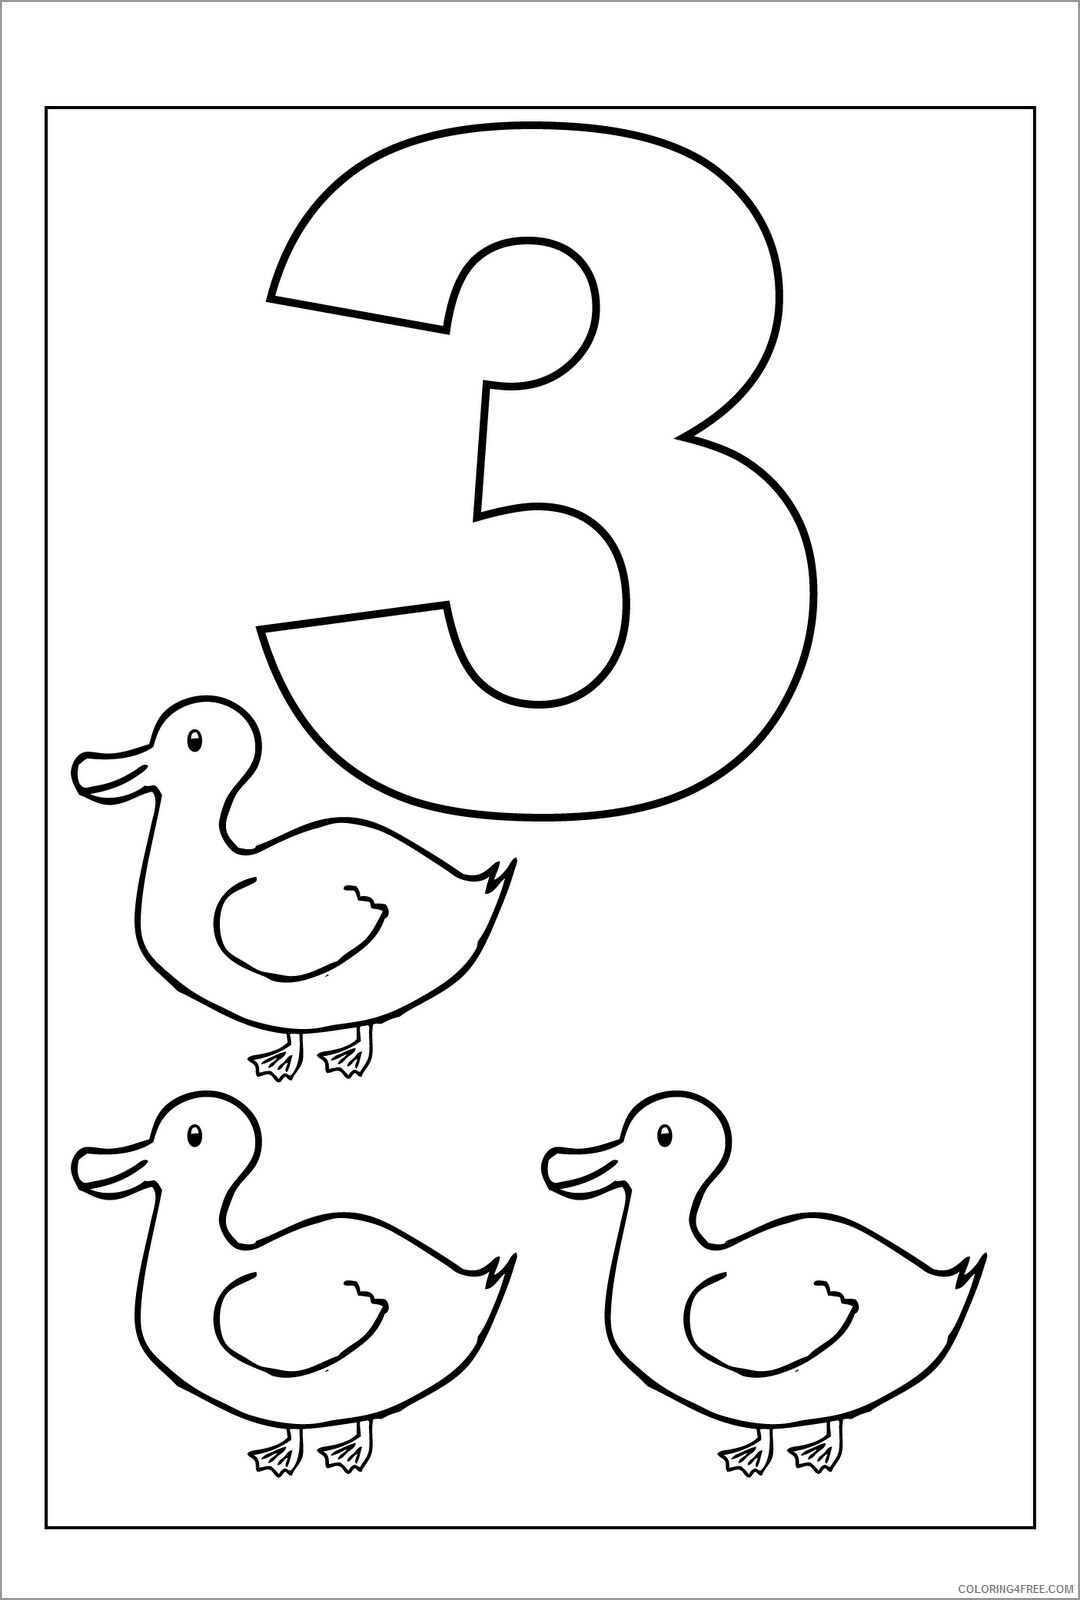 Duck Coloring Pages Animal Printable Sheets 3 ducks 2021 1787 Coloring4free